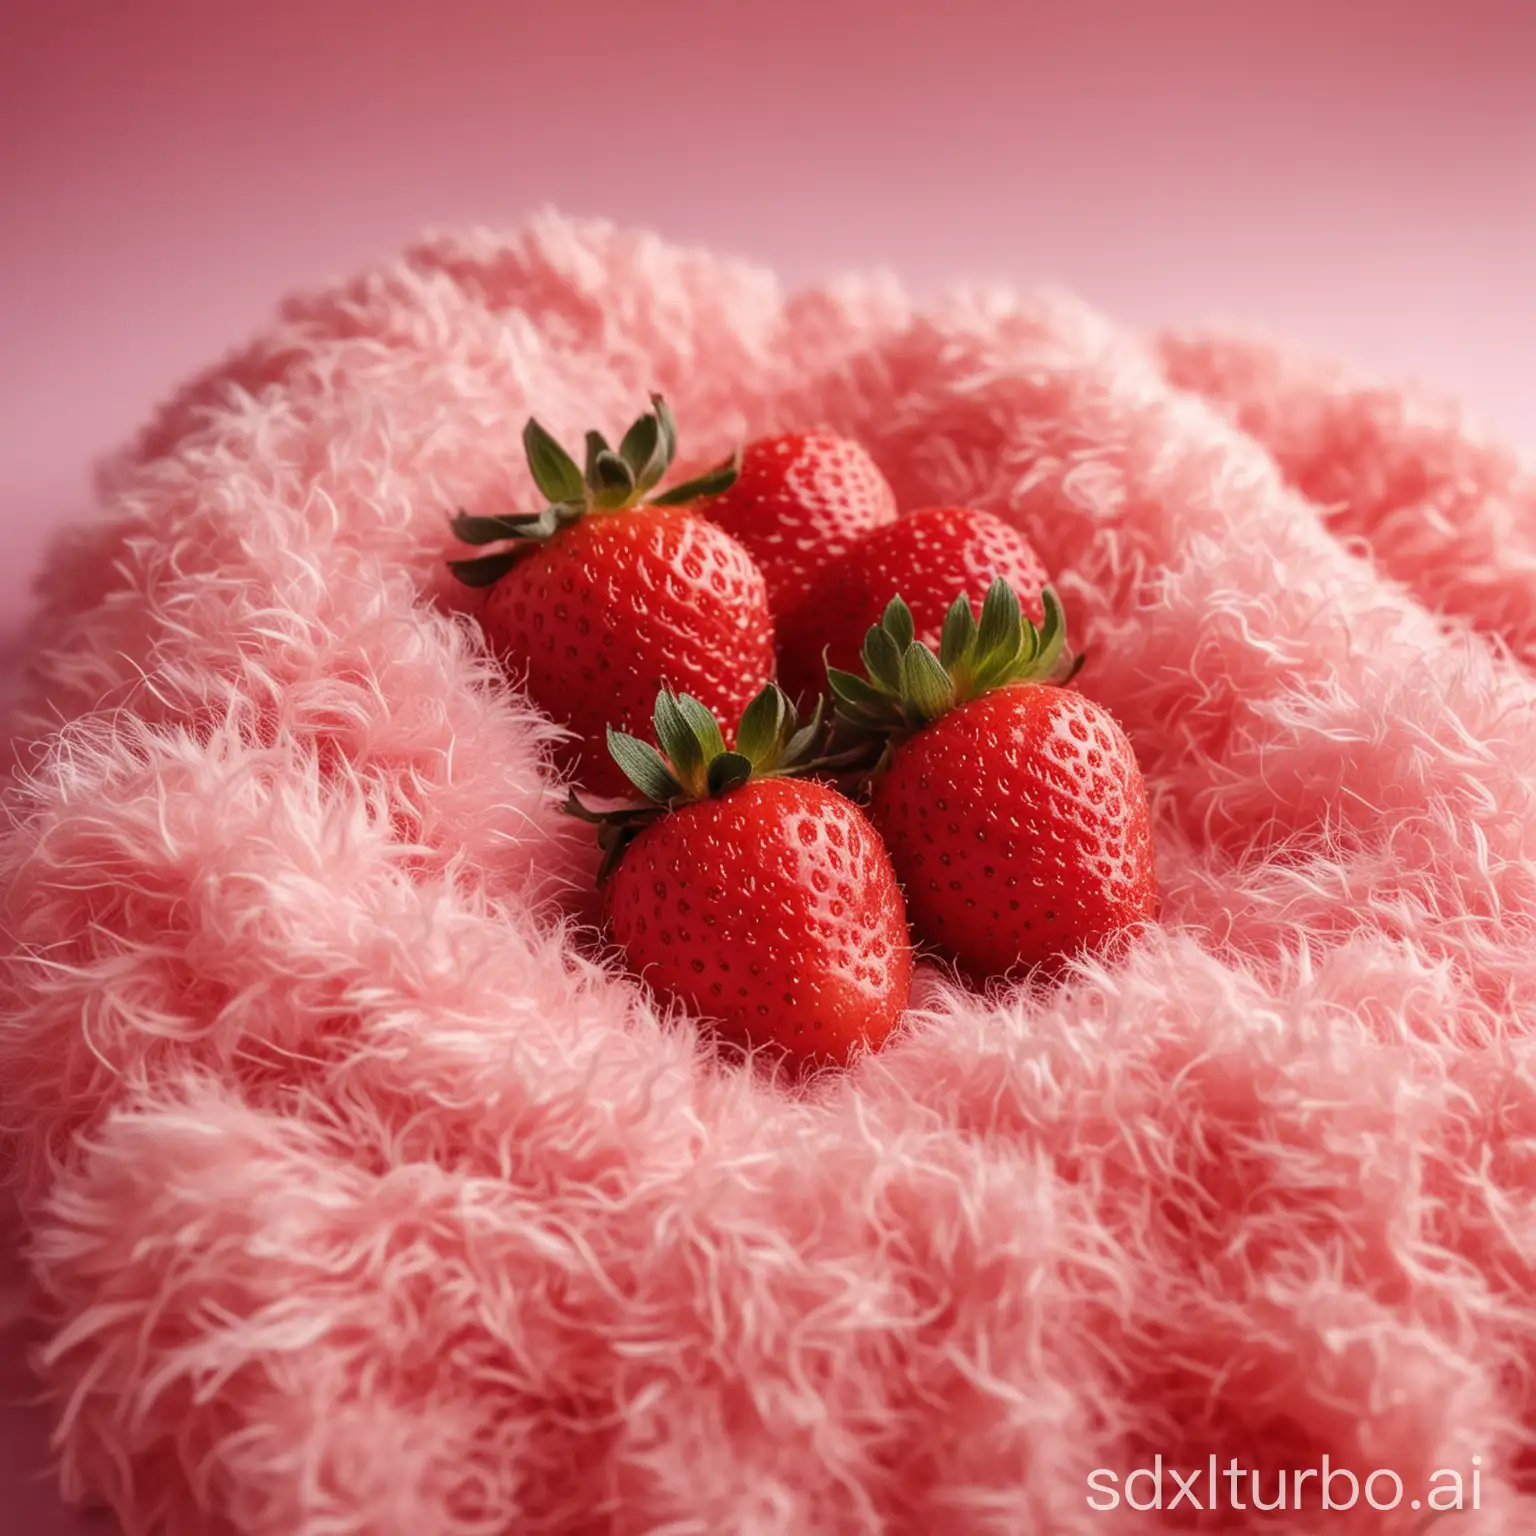 Delicious-Fluffy-Strawberries-Best-Quality-Gradient-Soft-Focus